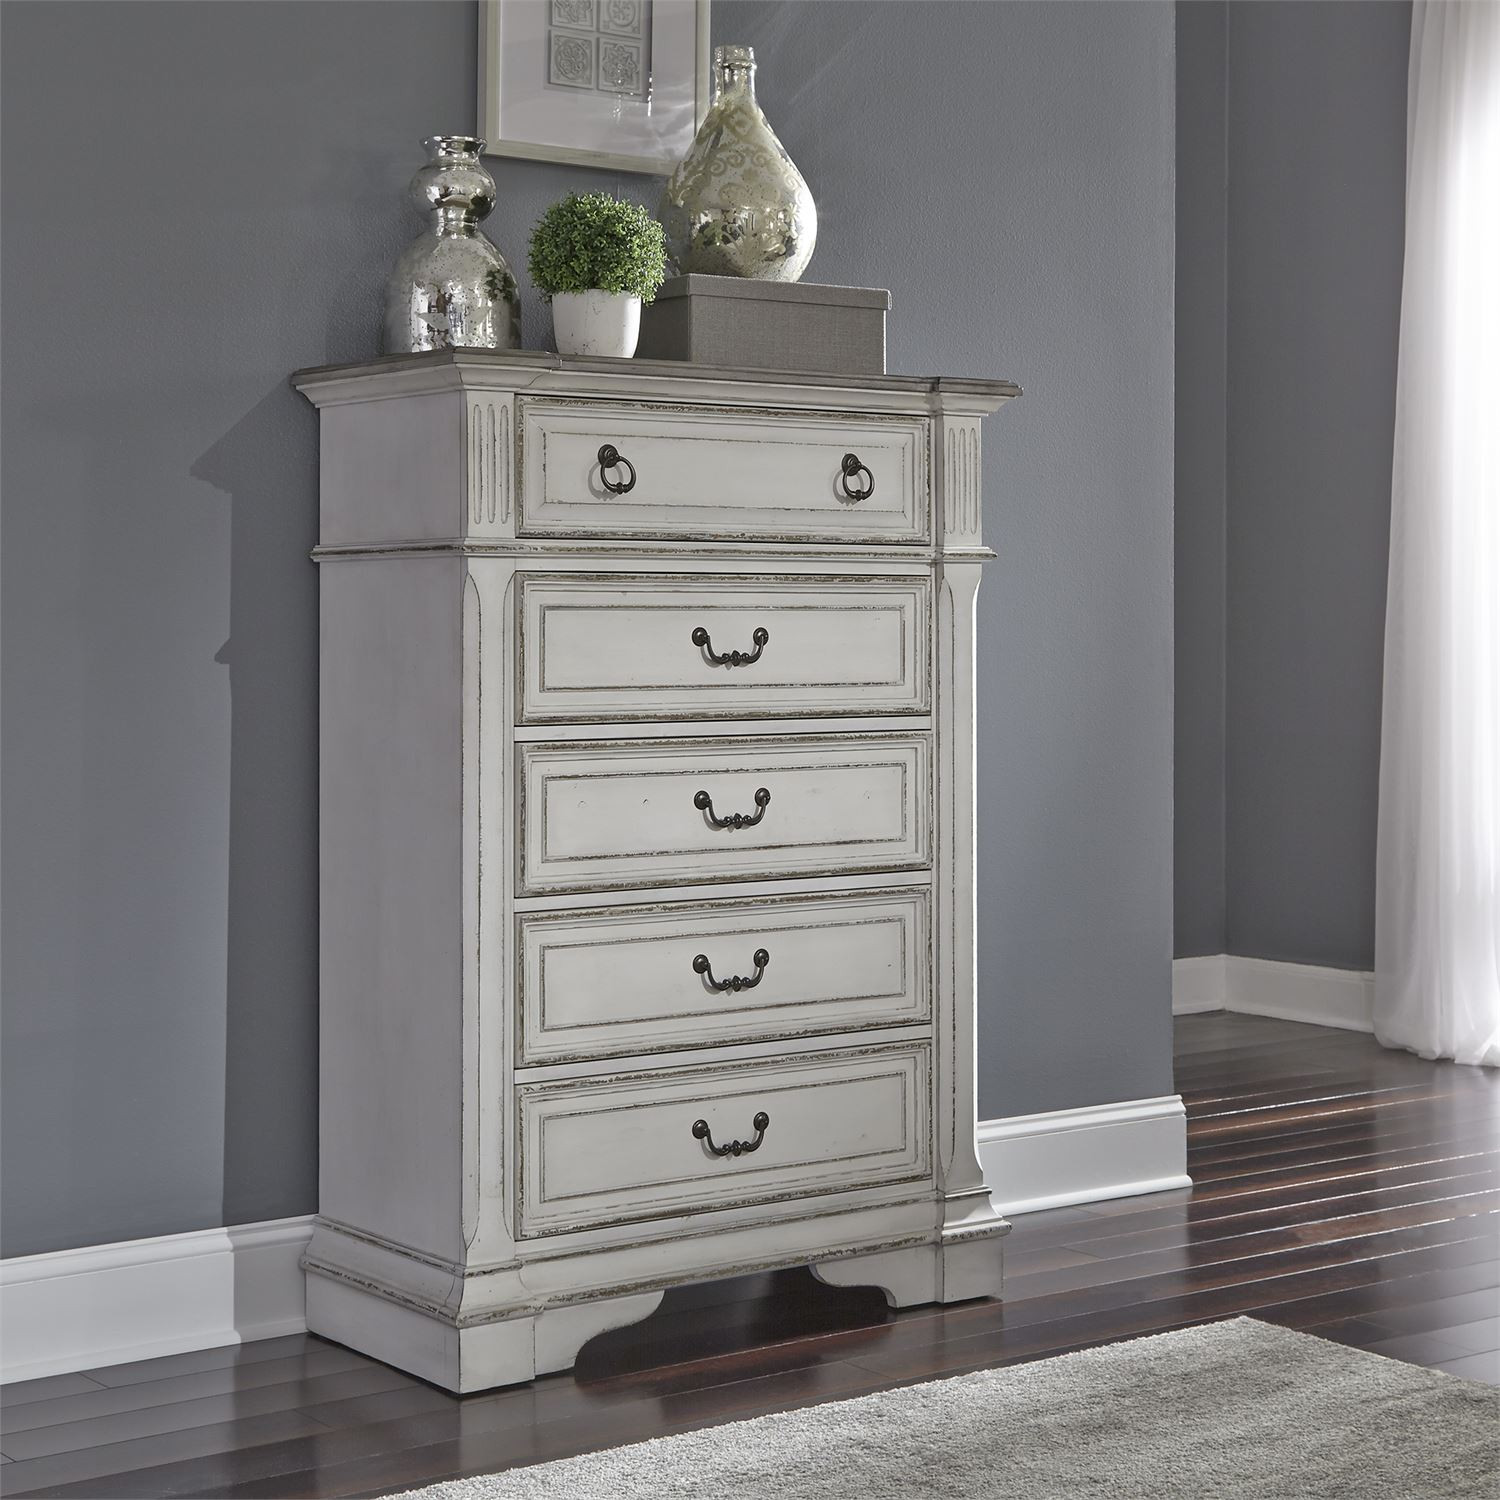 Five Drawer Chest Abbey Park Bedroom To Moderately